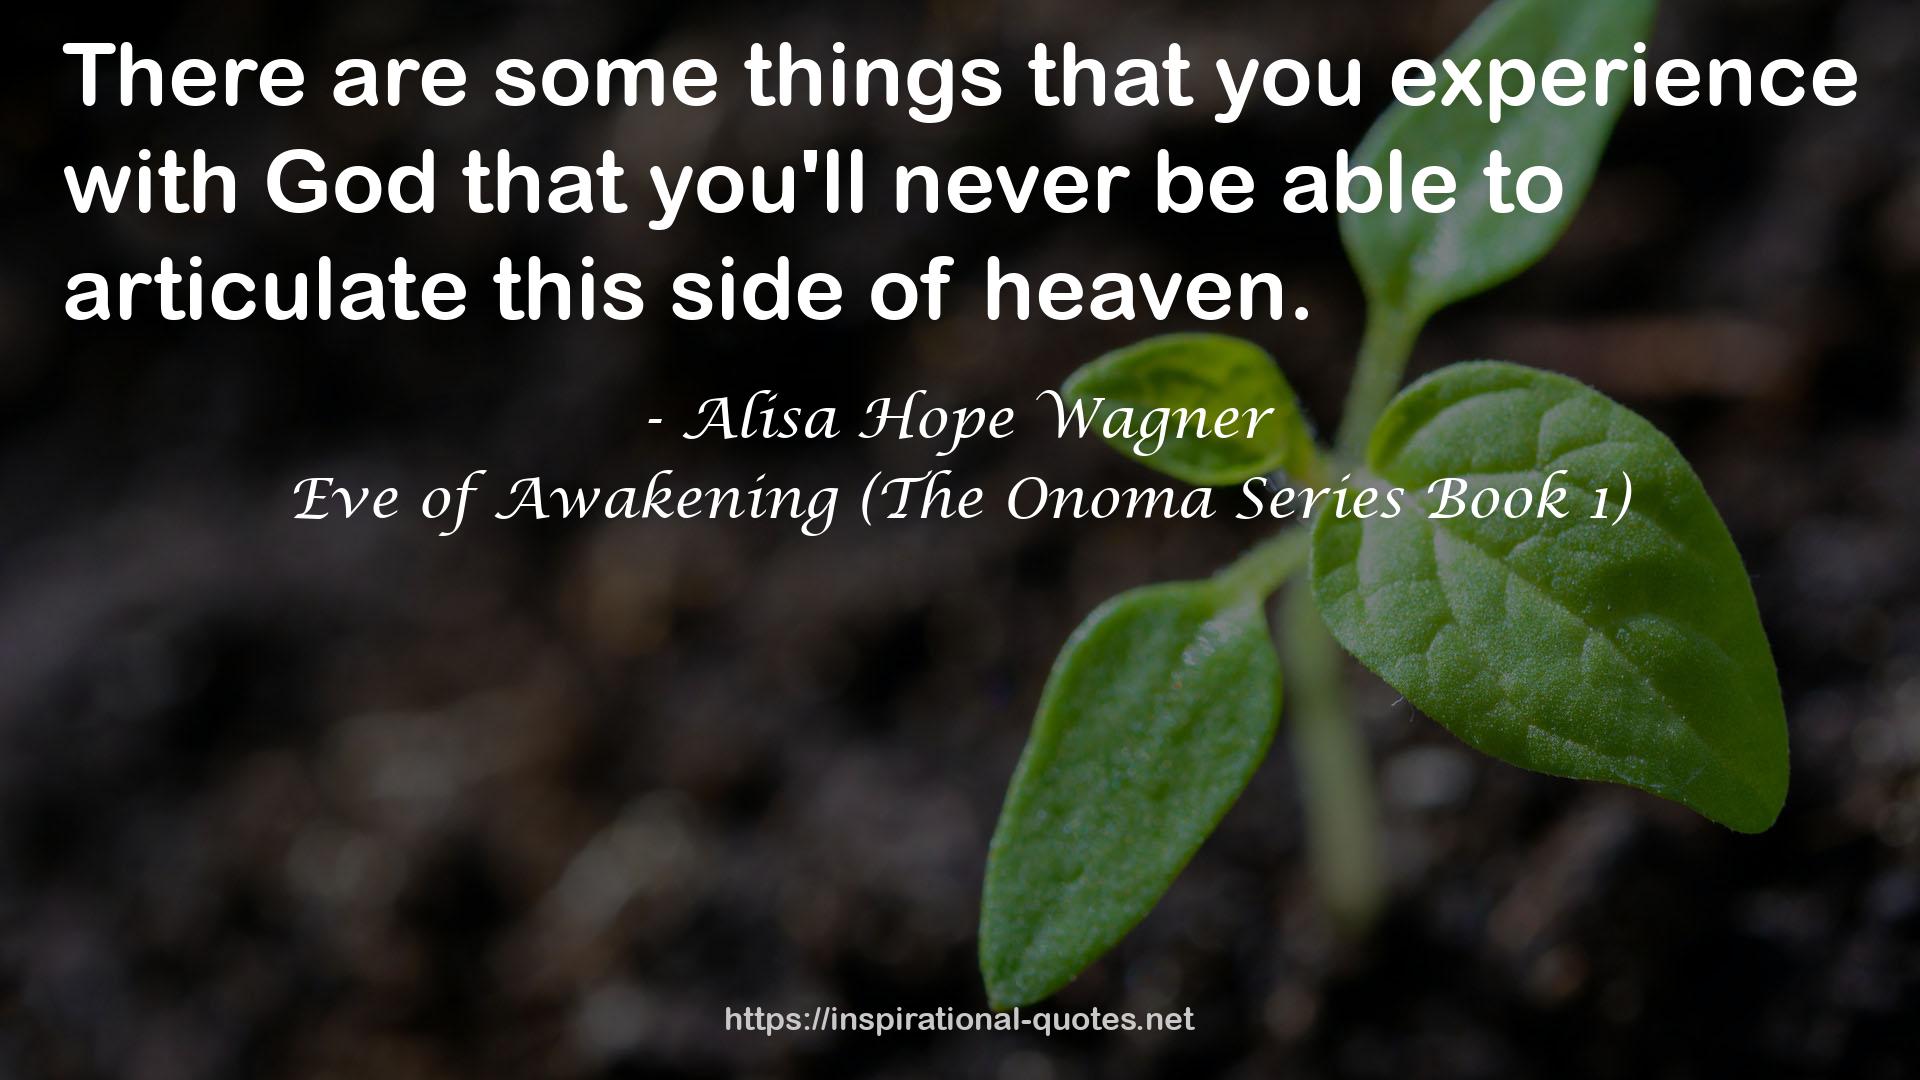 Eve of Awakening (The Onoma Series Book 1) QUOTES